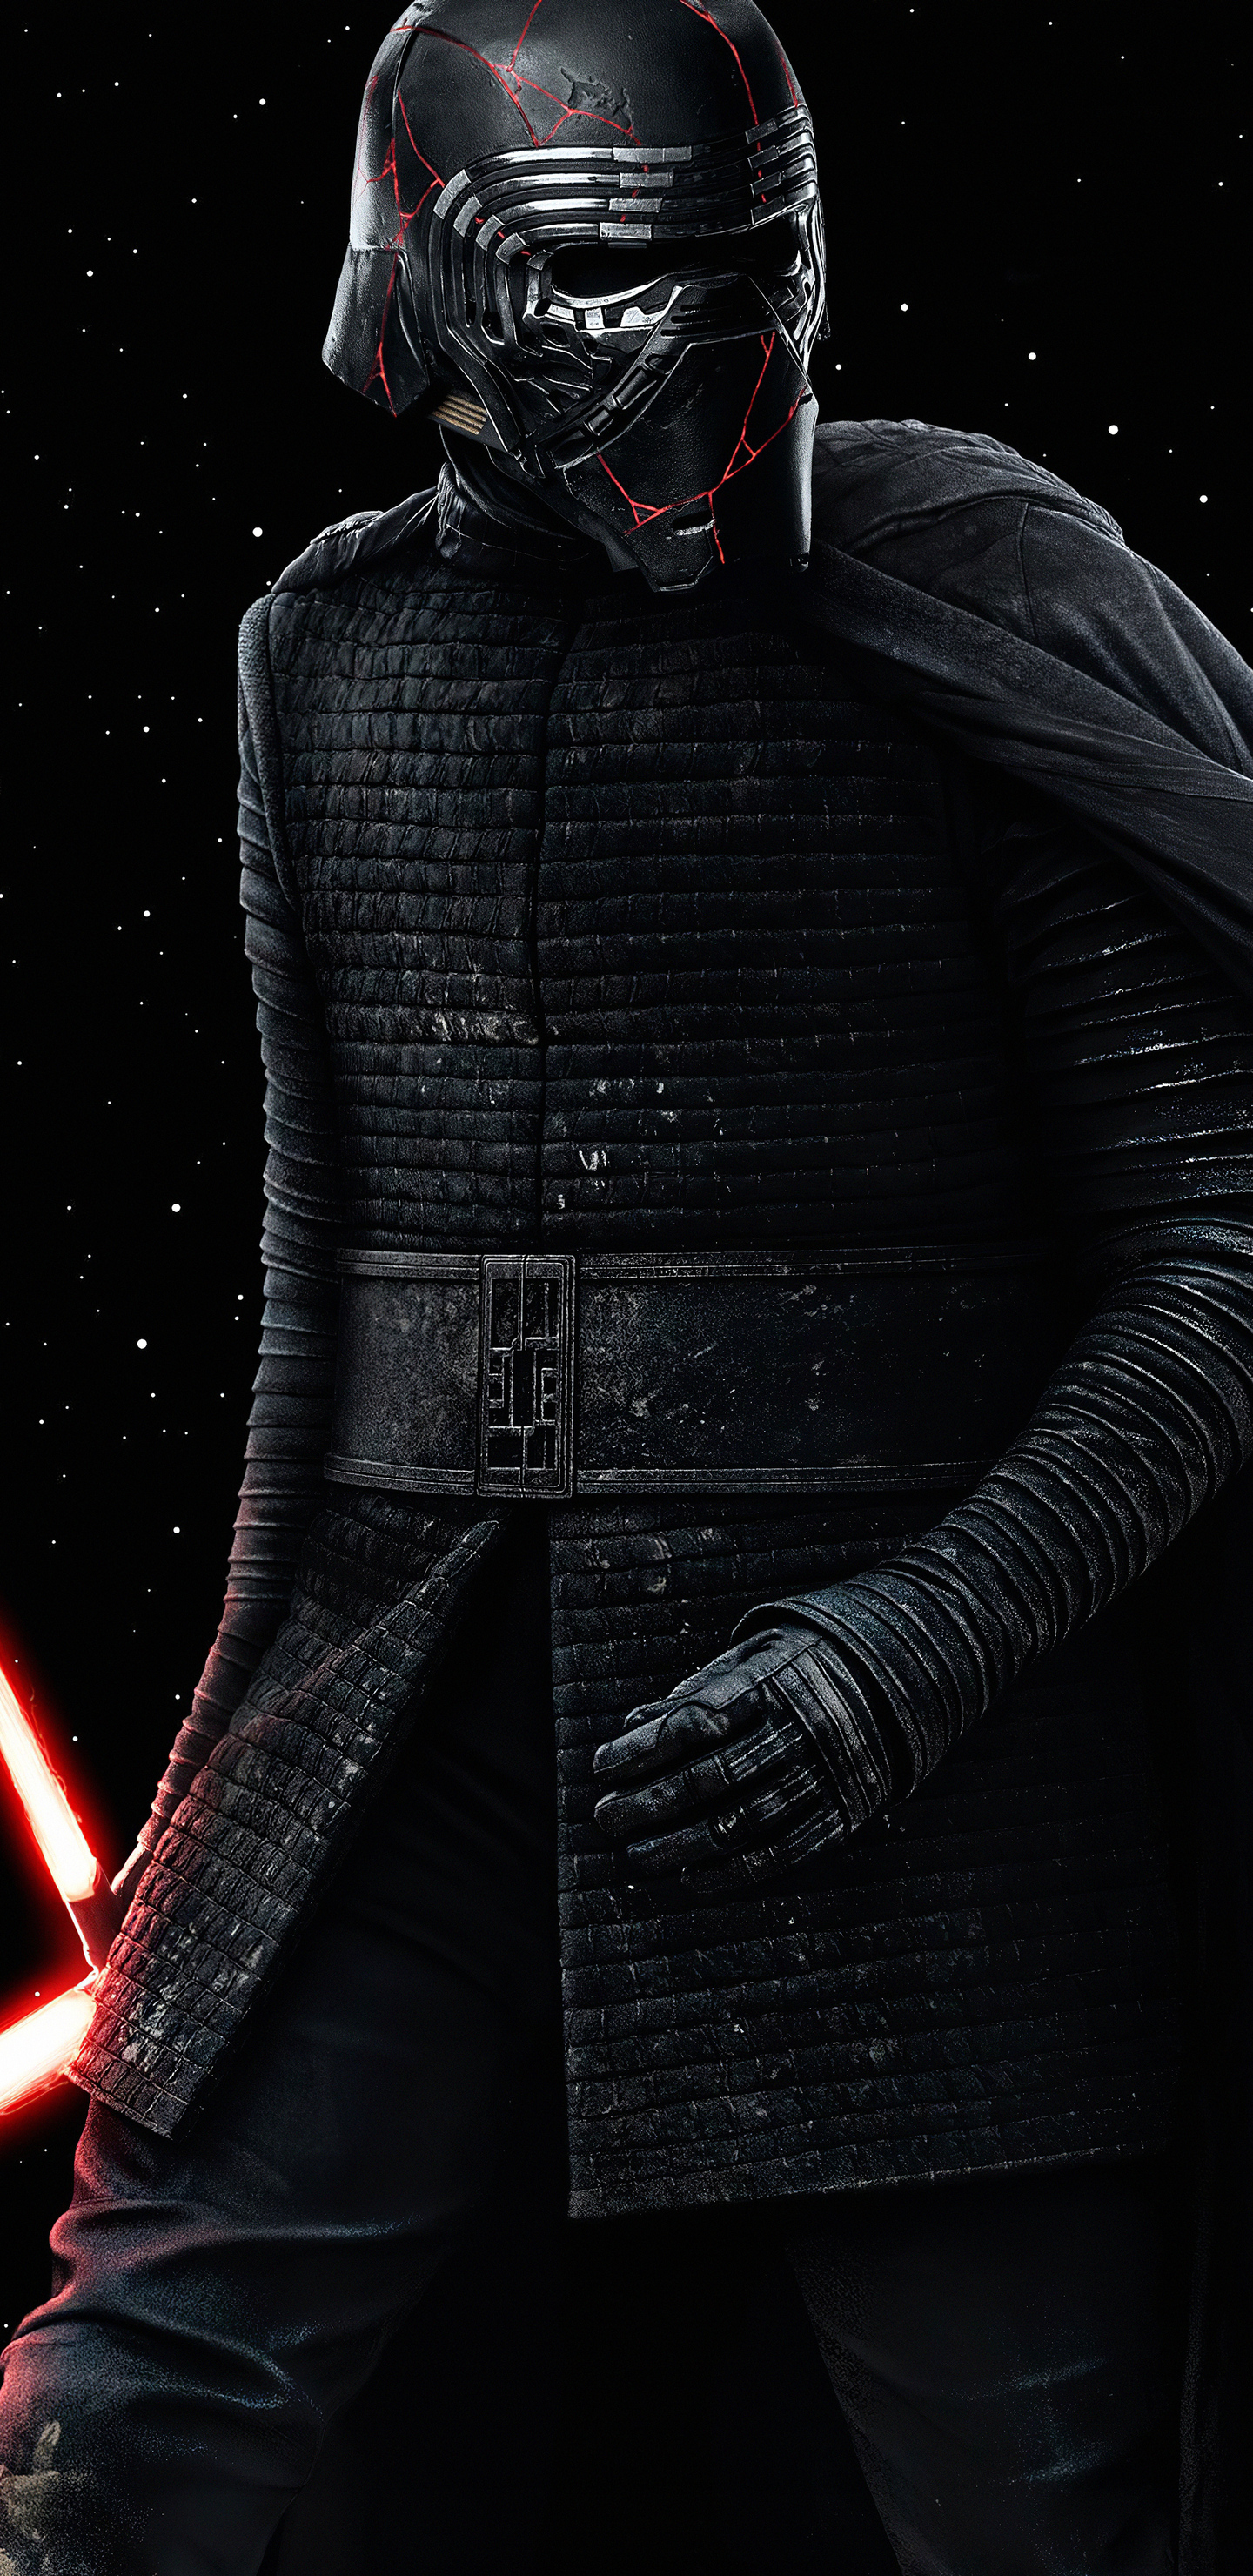 1440x2960 Star Wars The Rise Of Skywalker Kylo Ren Samsung Galaxy Note 9,8,  S9,S8,S8+ QHD HD 4k Wallpapers, Images, Backgrounds, Photos and Pictures